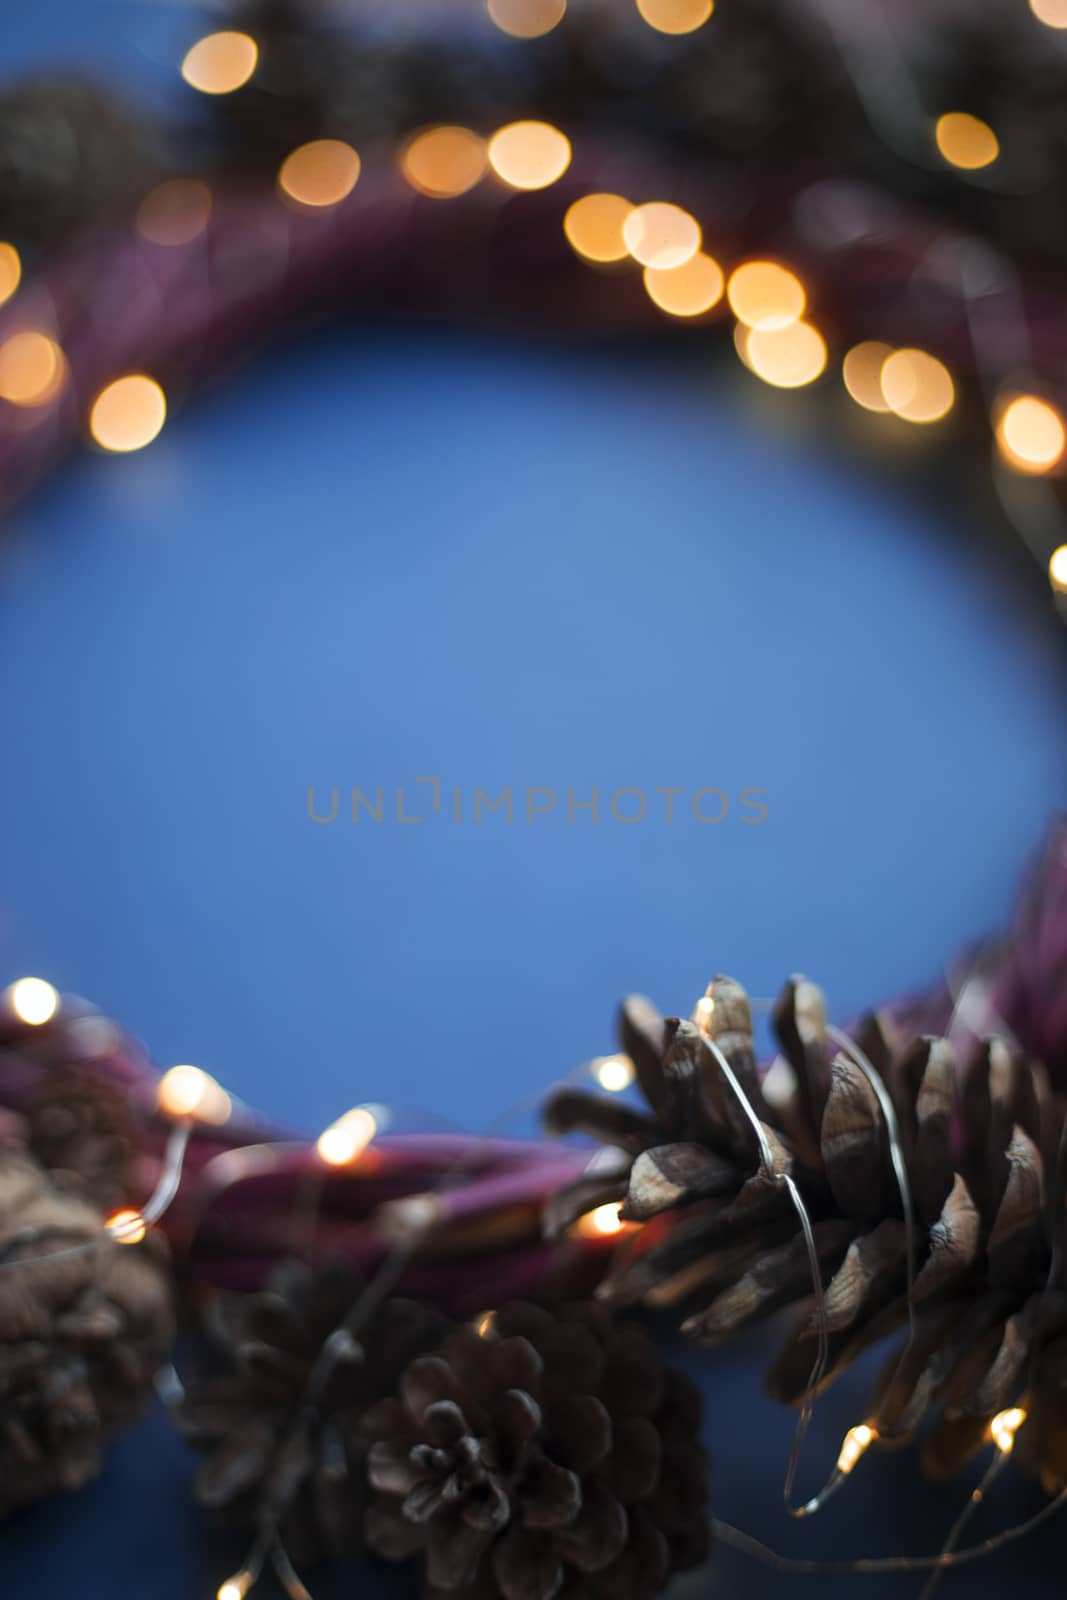 Christmas wreath of pine cones and glowing lights garland on blue background copy space text